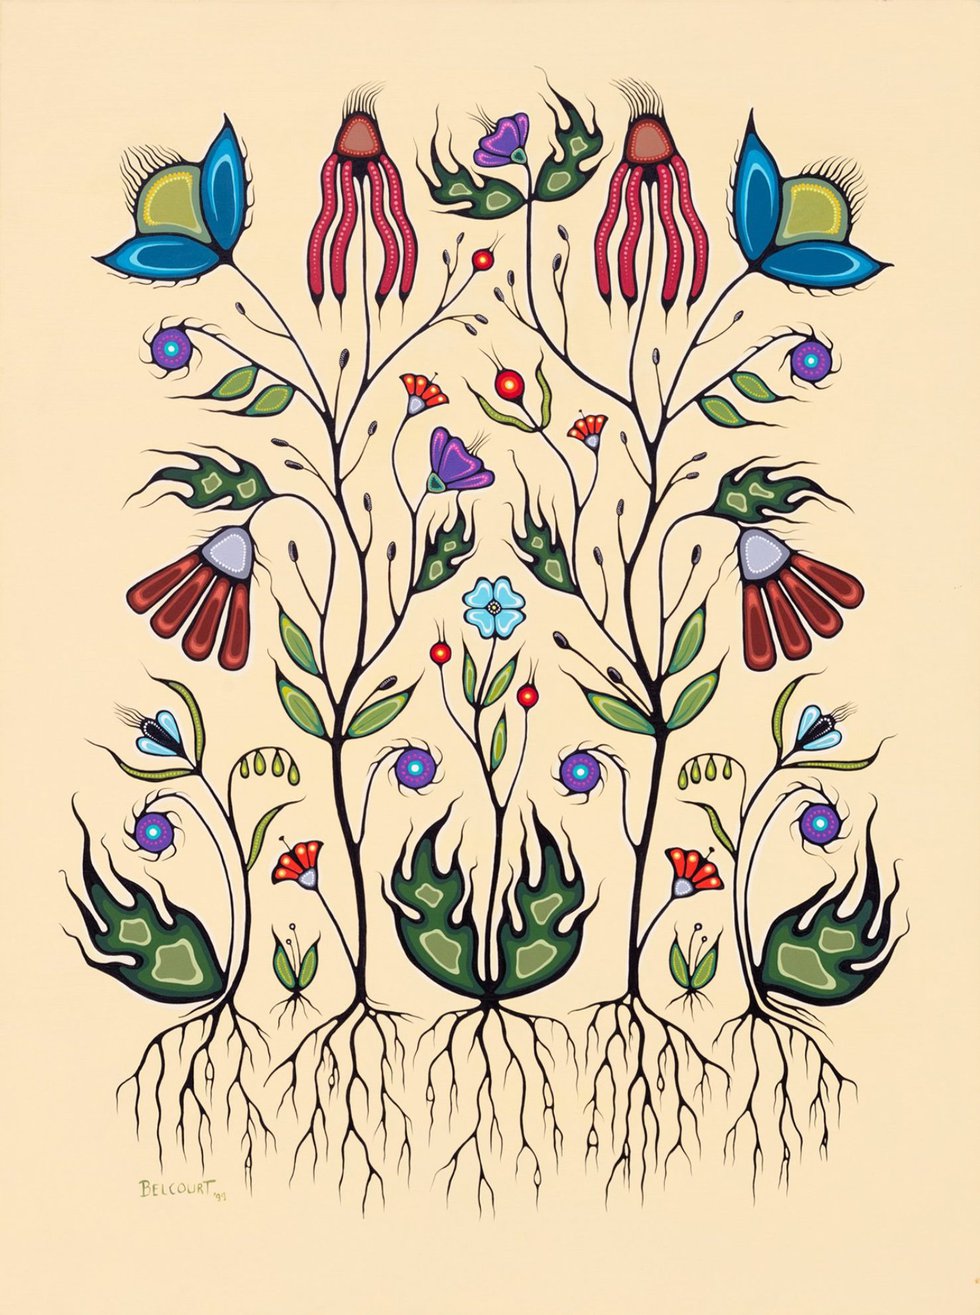 Christi Belcourt, "Resilience of the Flower Beadwork People," 1999